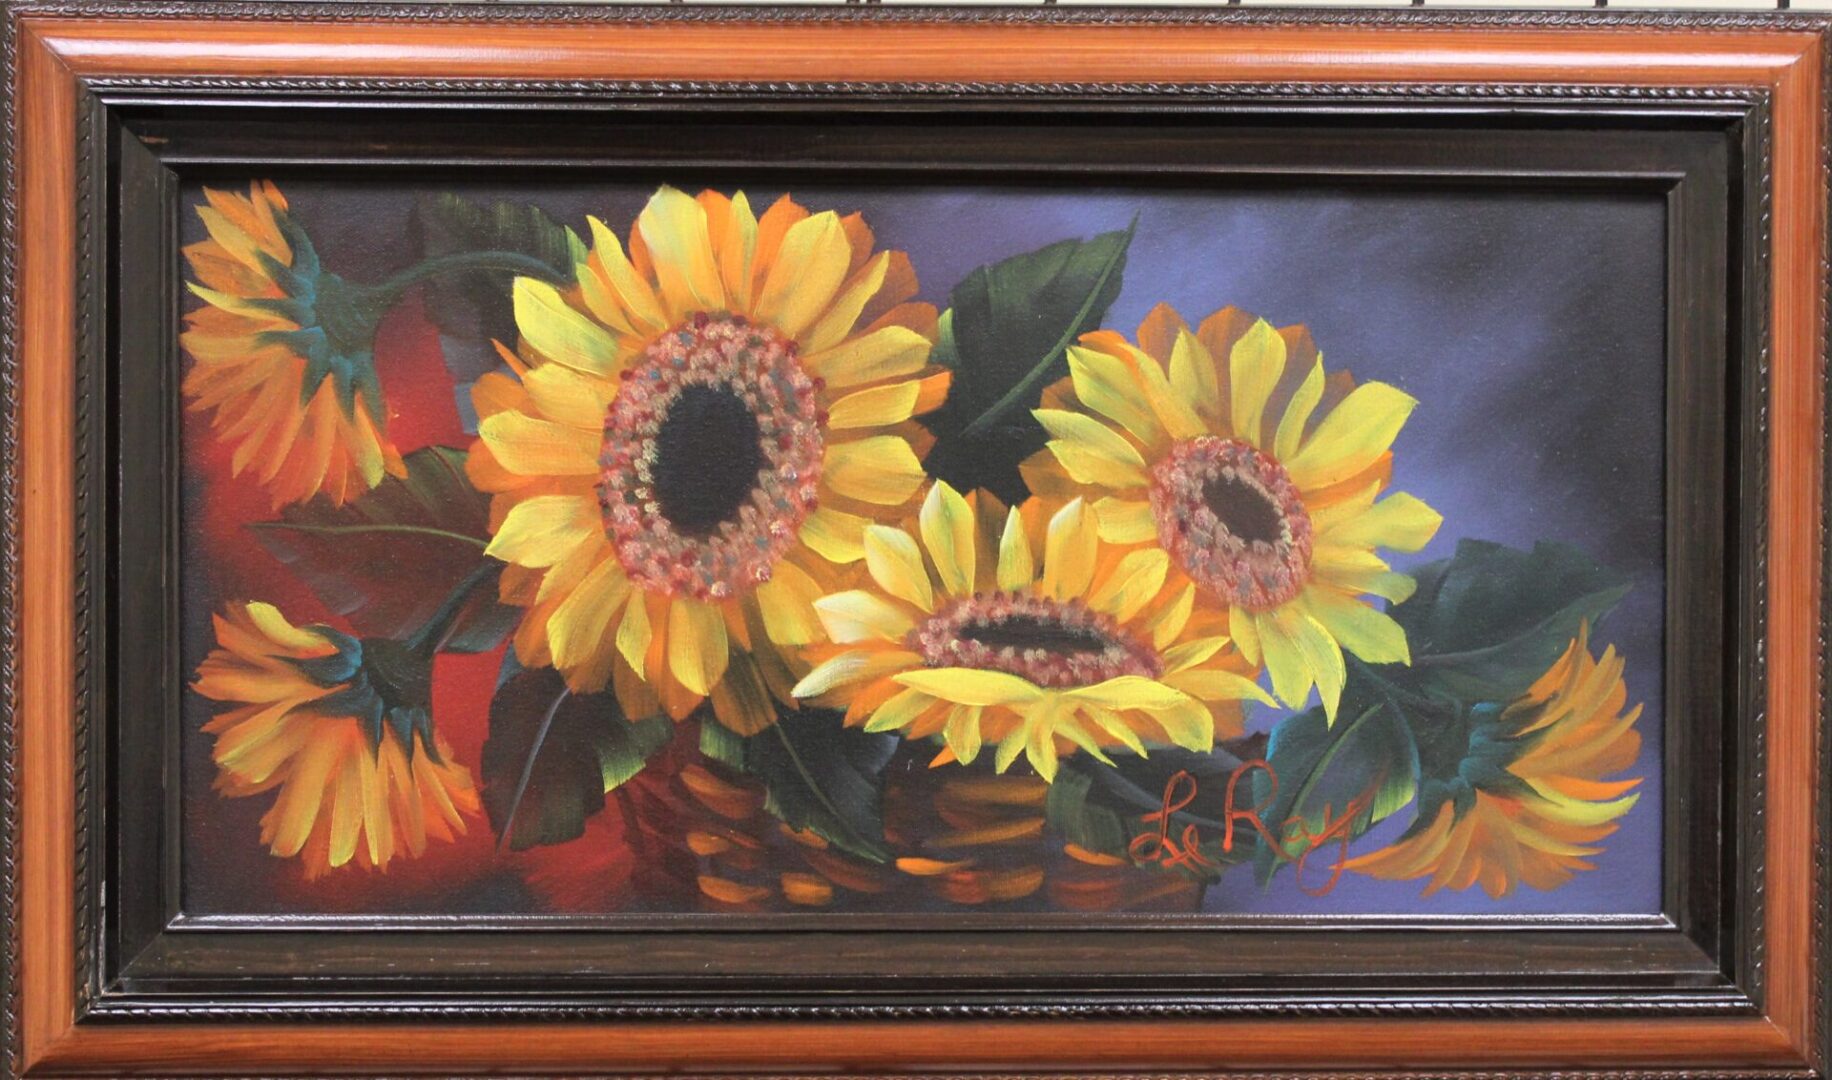 Painting of a sunflower with frame